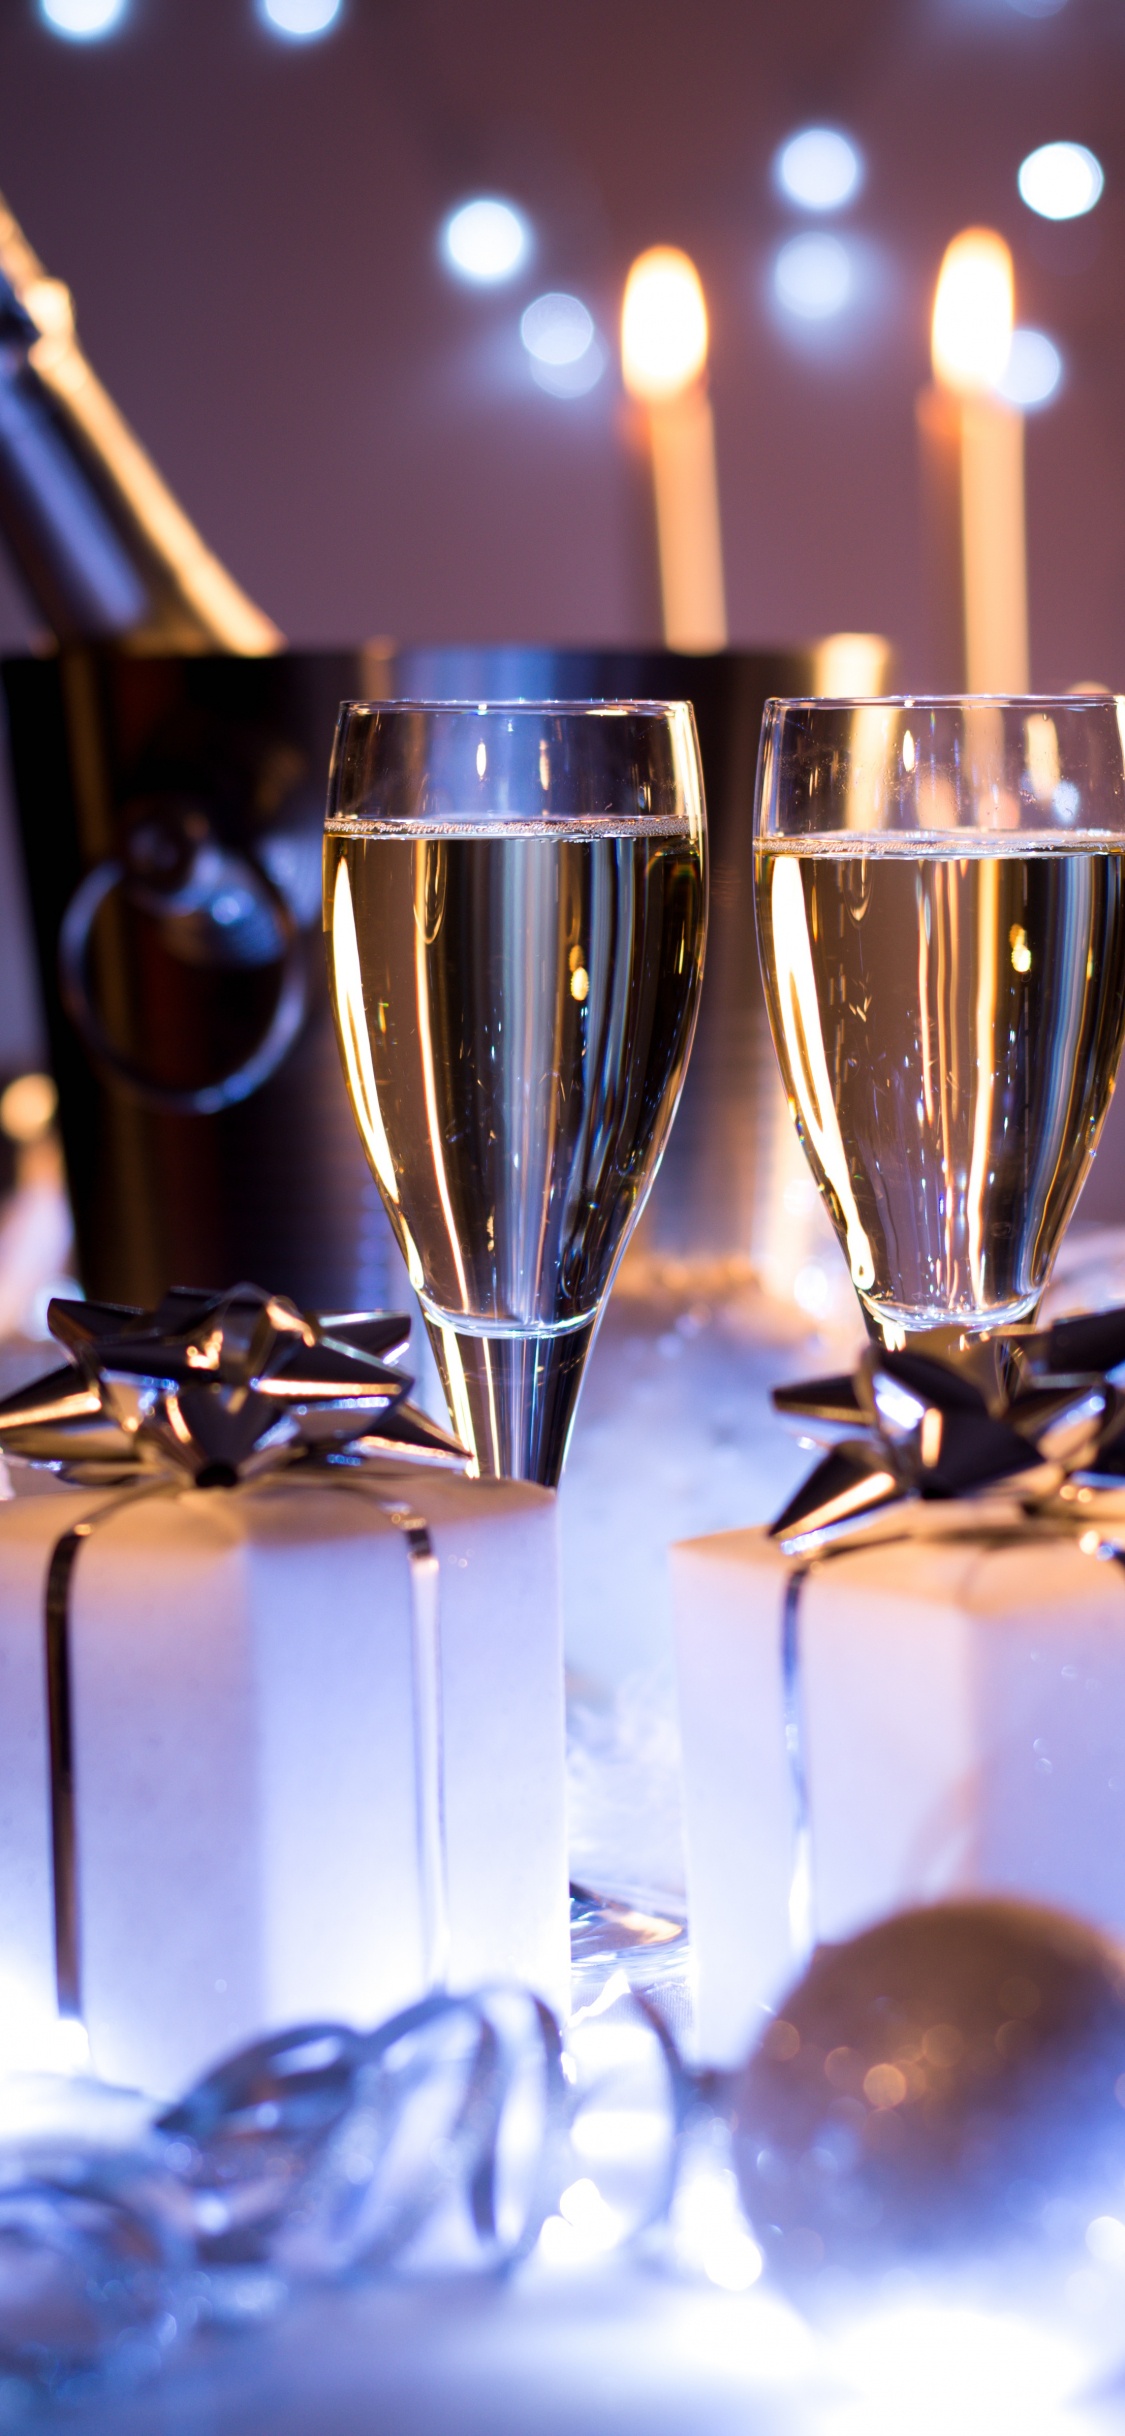 Champagne, Wine, New Years Eve, New Year, Still Life. Wallpaper in 1125x2436 Resolution